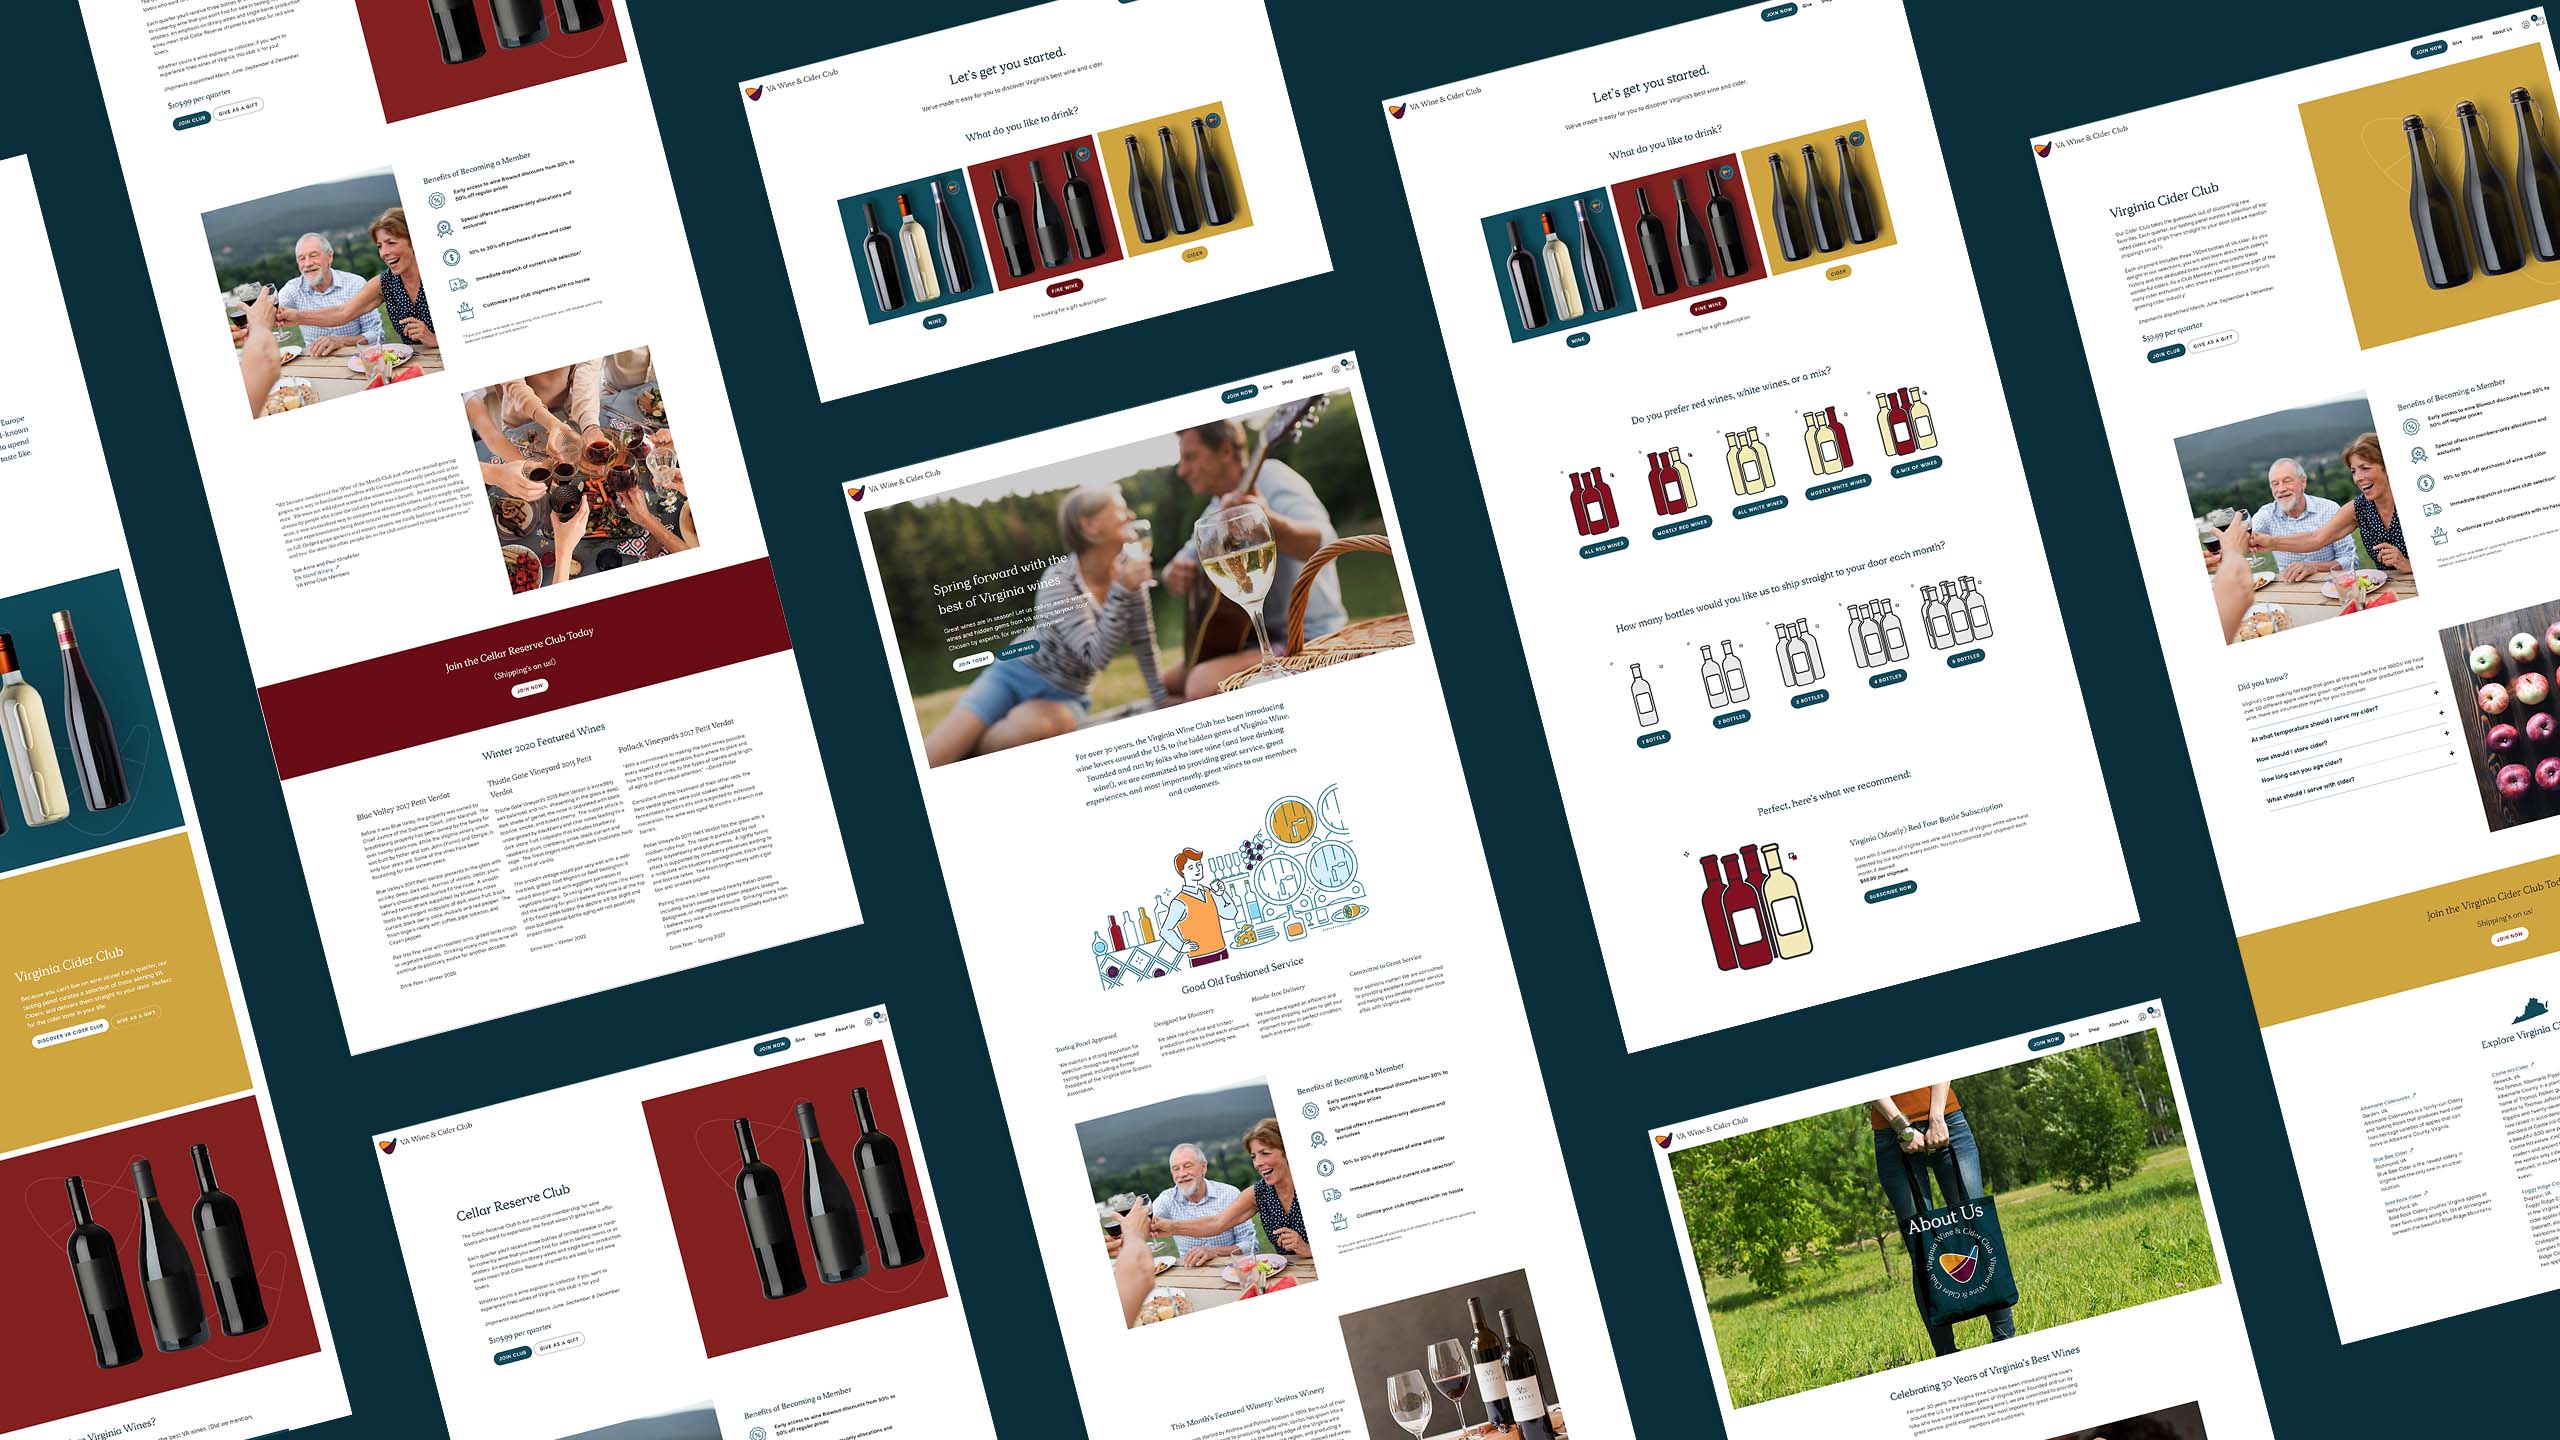 Stylized mockup showing various pages from the Virginia Wine Club website designed by 5forests